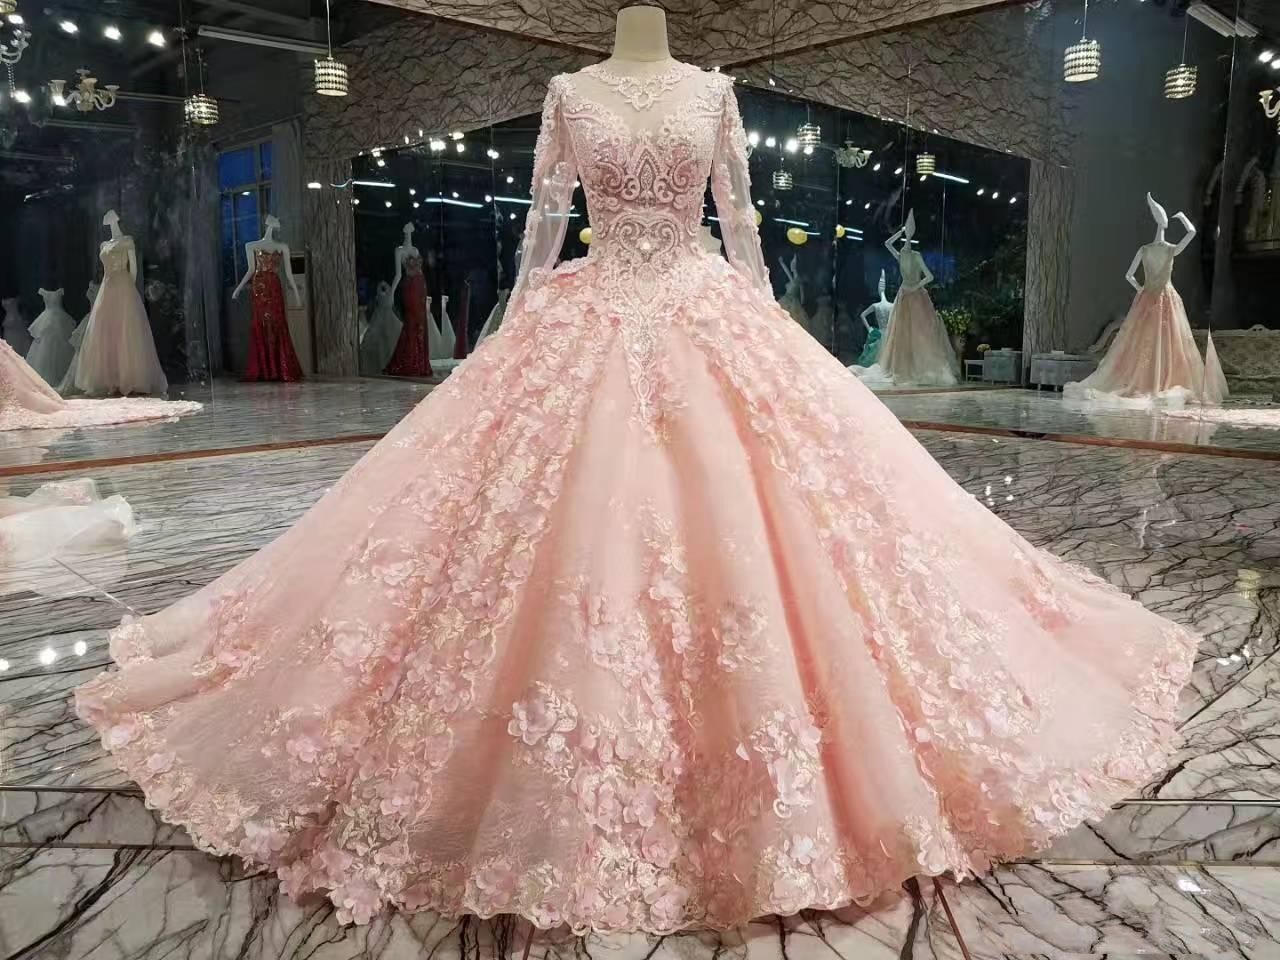 2020 Pearl Pink 3D Flowers Ball Gown Wedding Drseses Luxury Long Sleevs  Jewel Neck Lace Plus